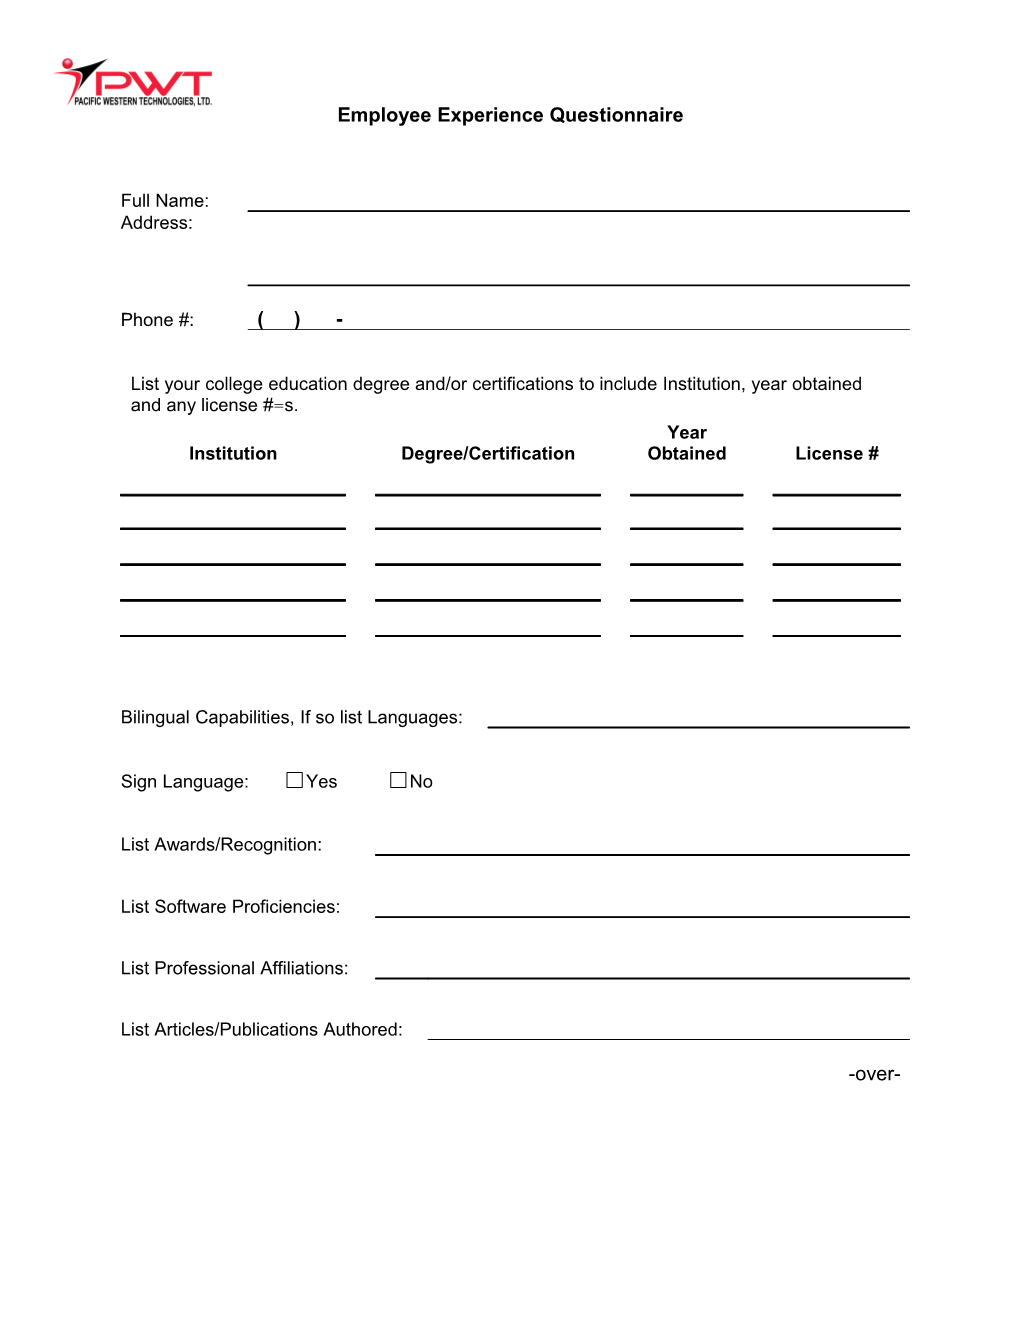 Employee Experience Questionnaire